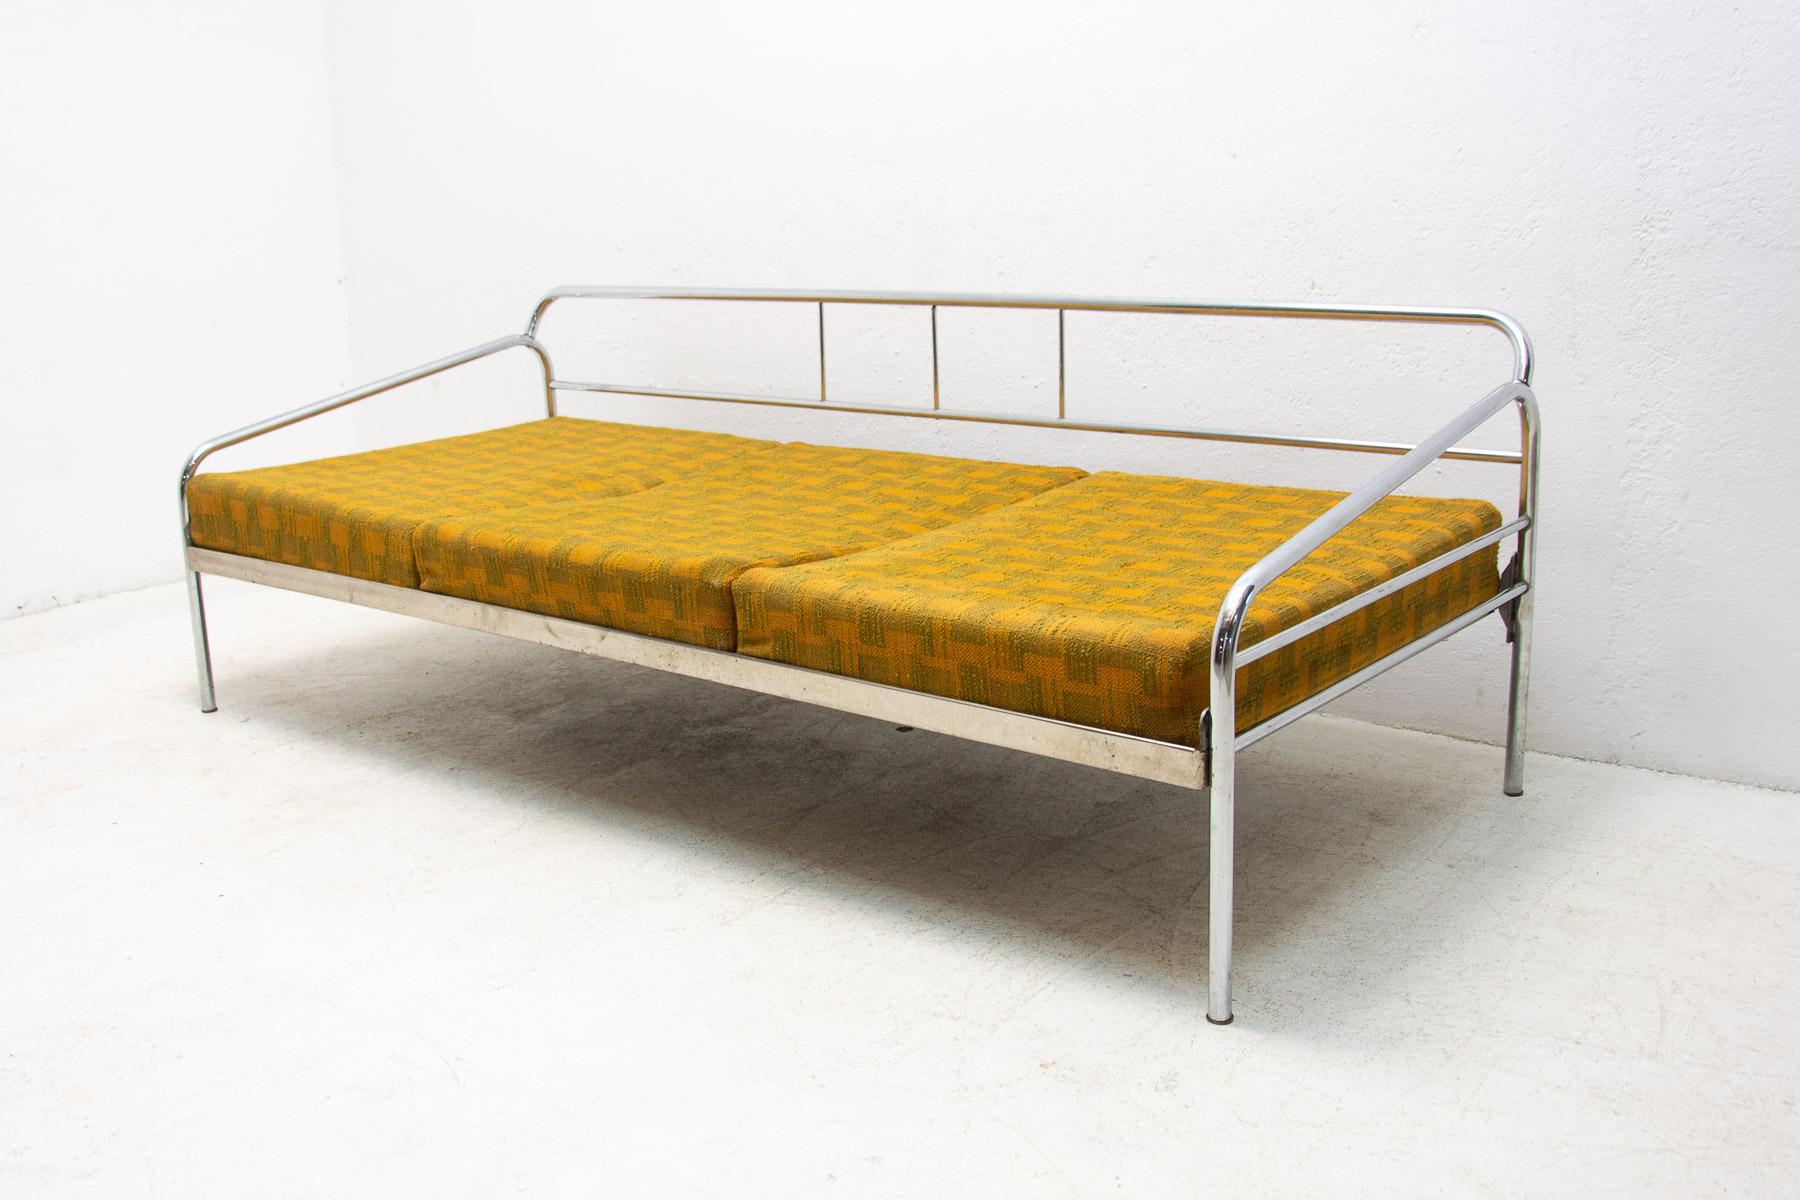 Chrome tubular steel sofa, designed probably by Hynek Gottwald during the Bauhaus period in the 1930s, This sofa was made in the 1940s. The chrome is overall in good Vintage condition, showing some signs of age and use.

Measures: height: 68